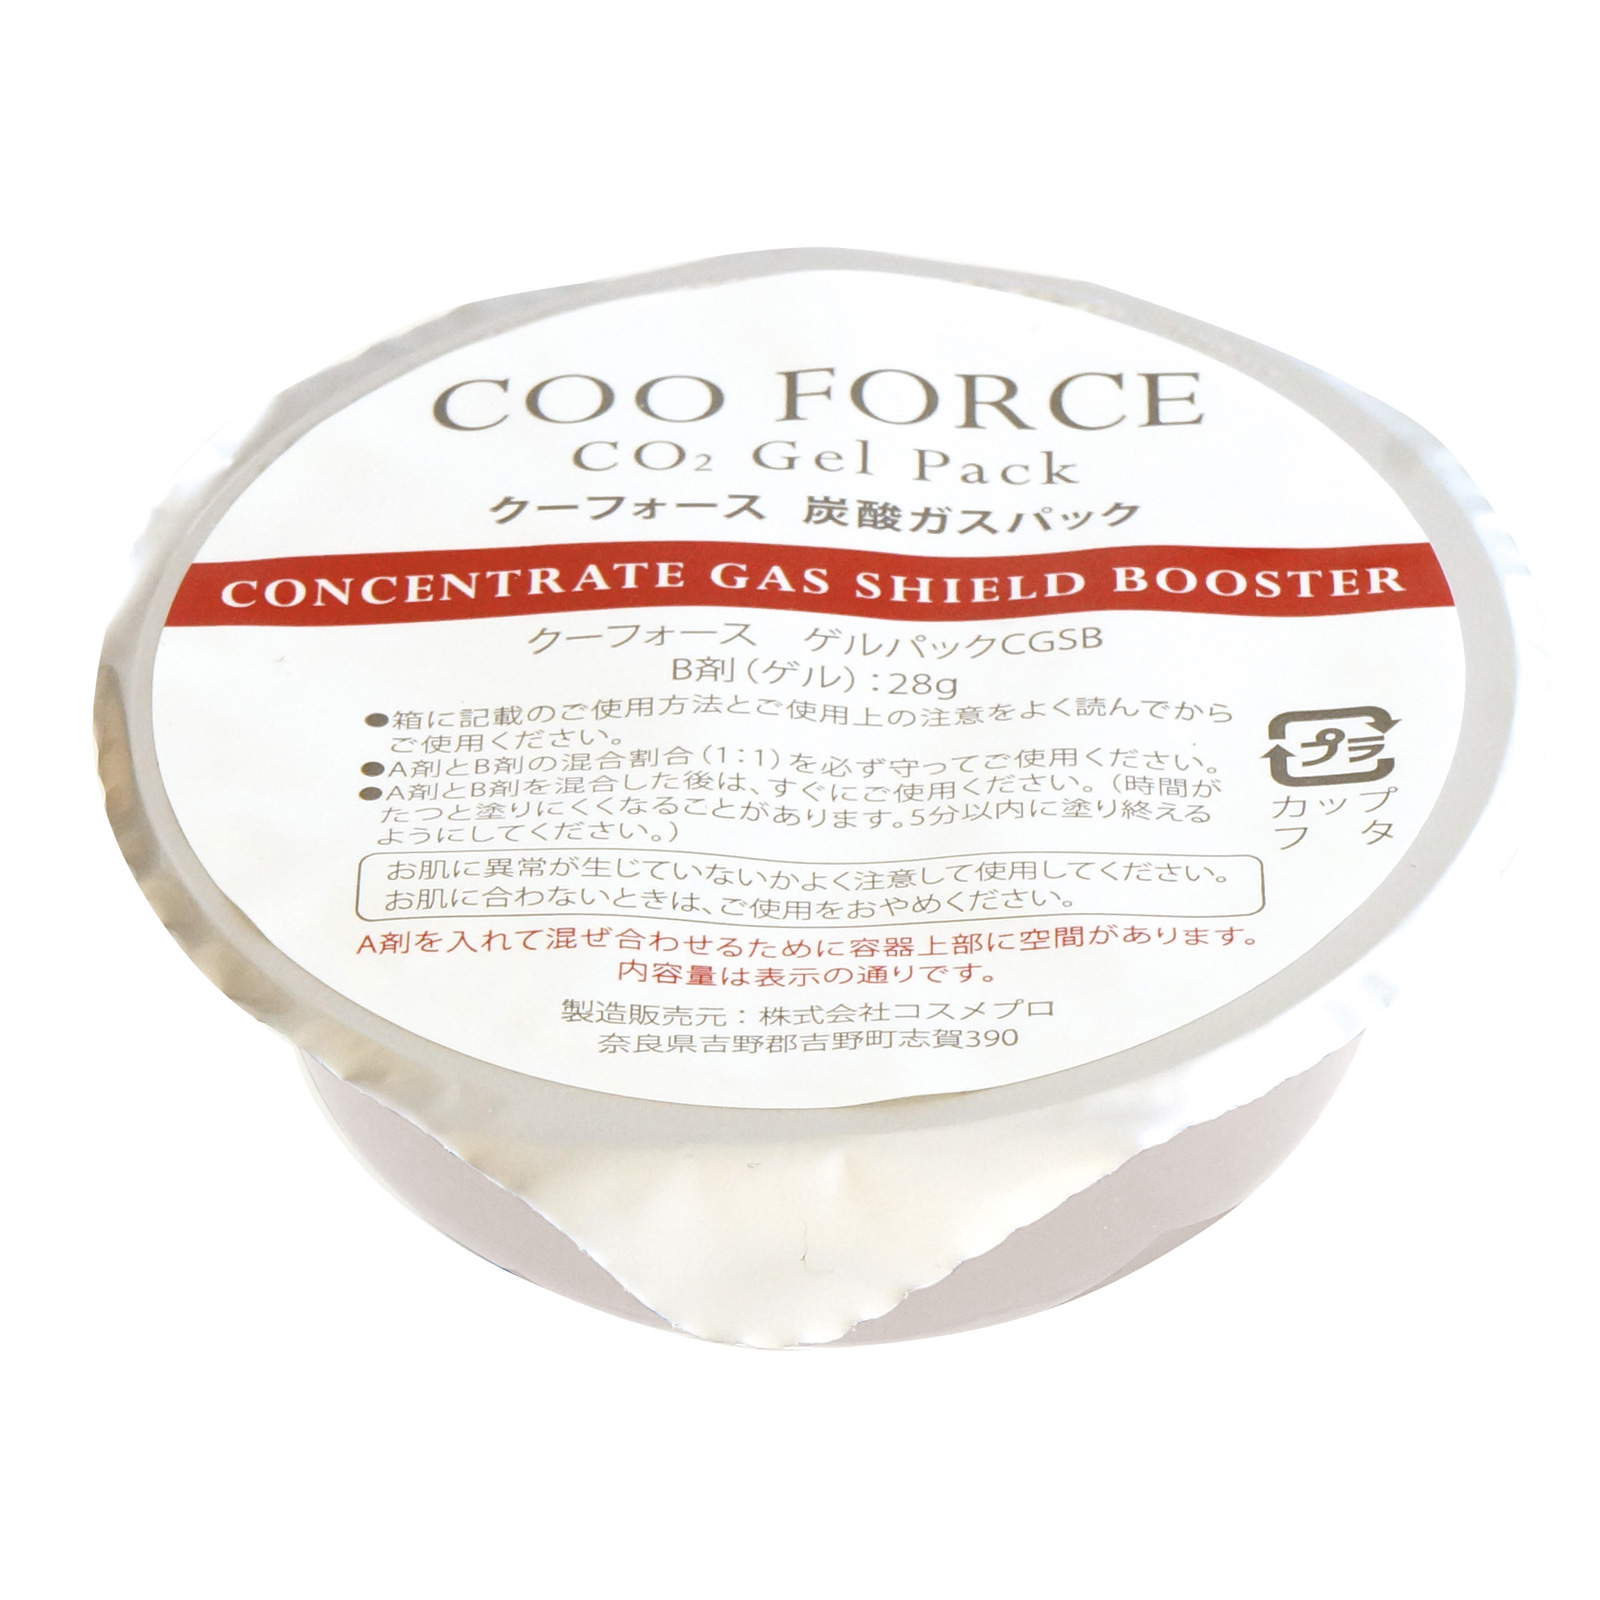 Cosmepro Coo Force CO2 Gel Pack. Гелевая карбокси маска для лица Космепро, 4 шт.